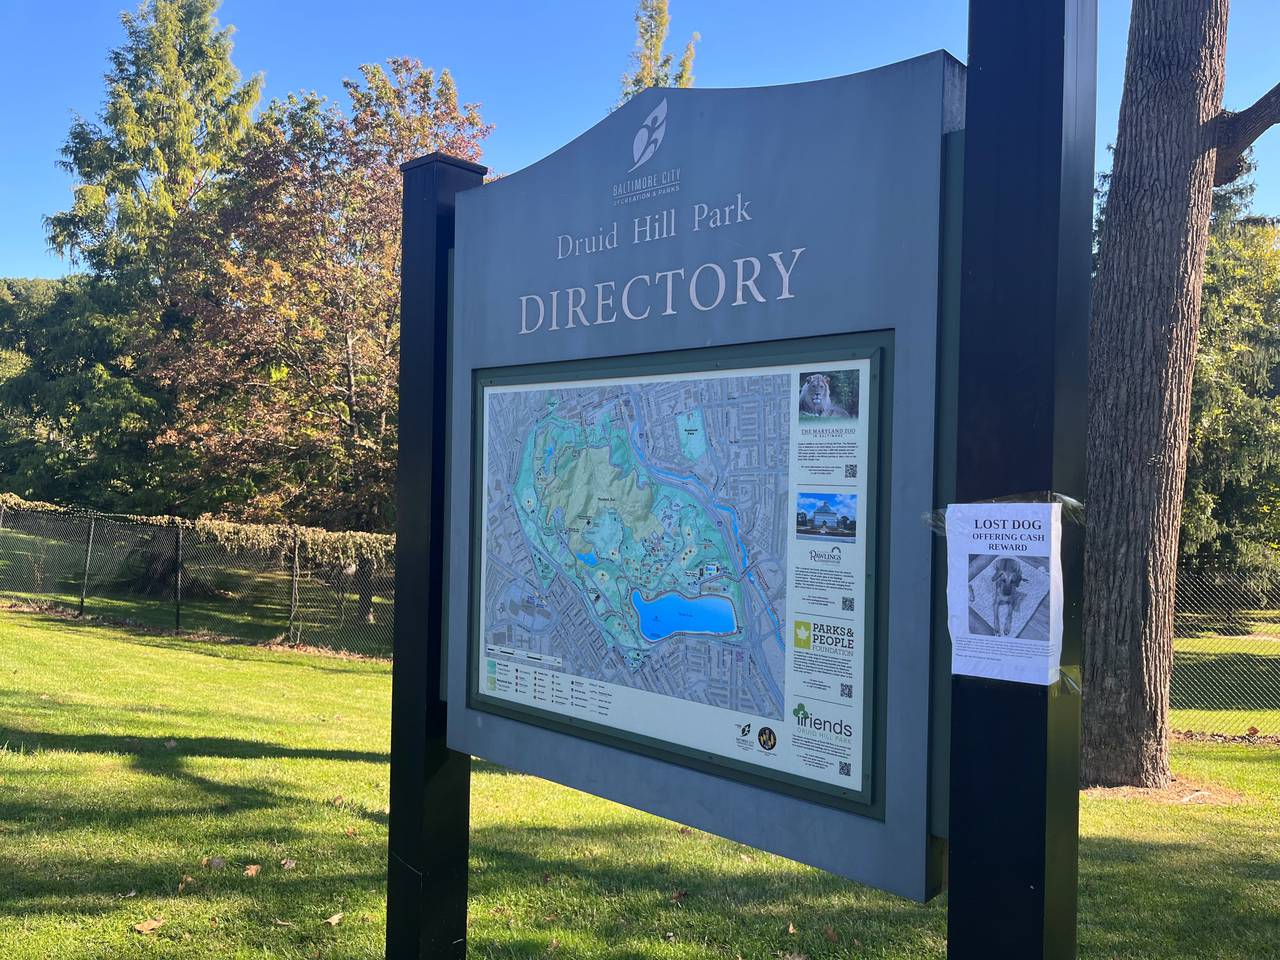 The Druid Hill Park directory showcases a map of the 745 acre greenspace.